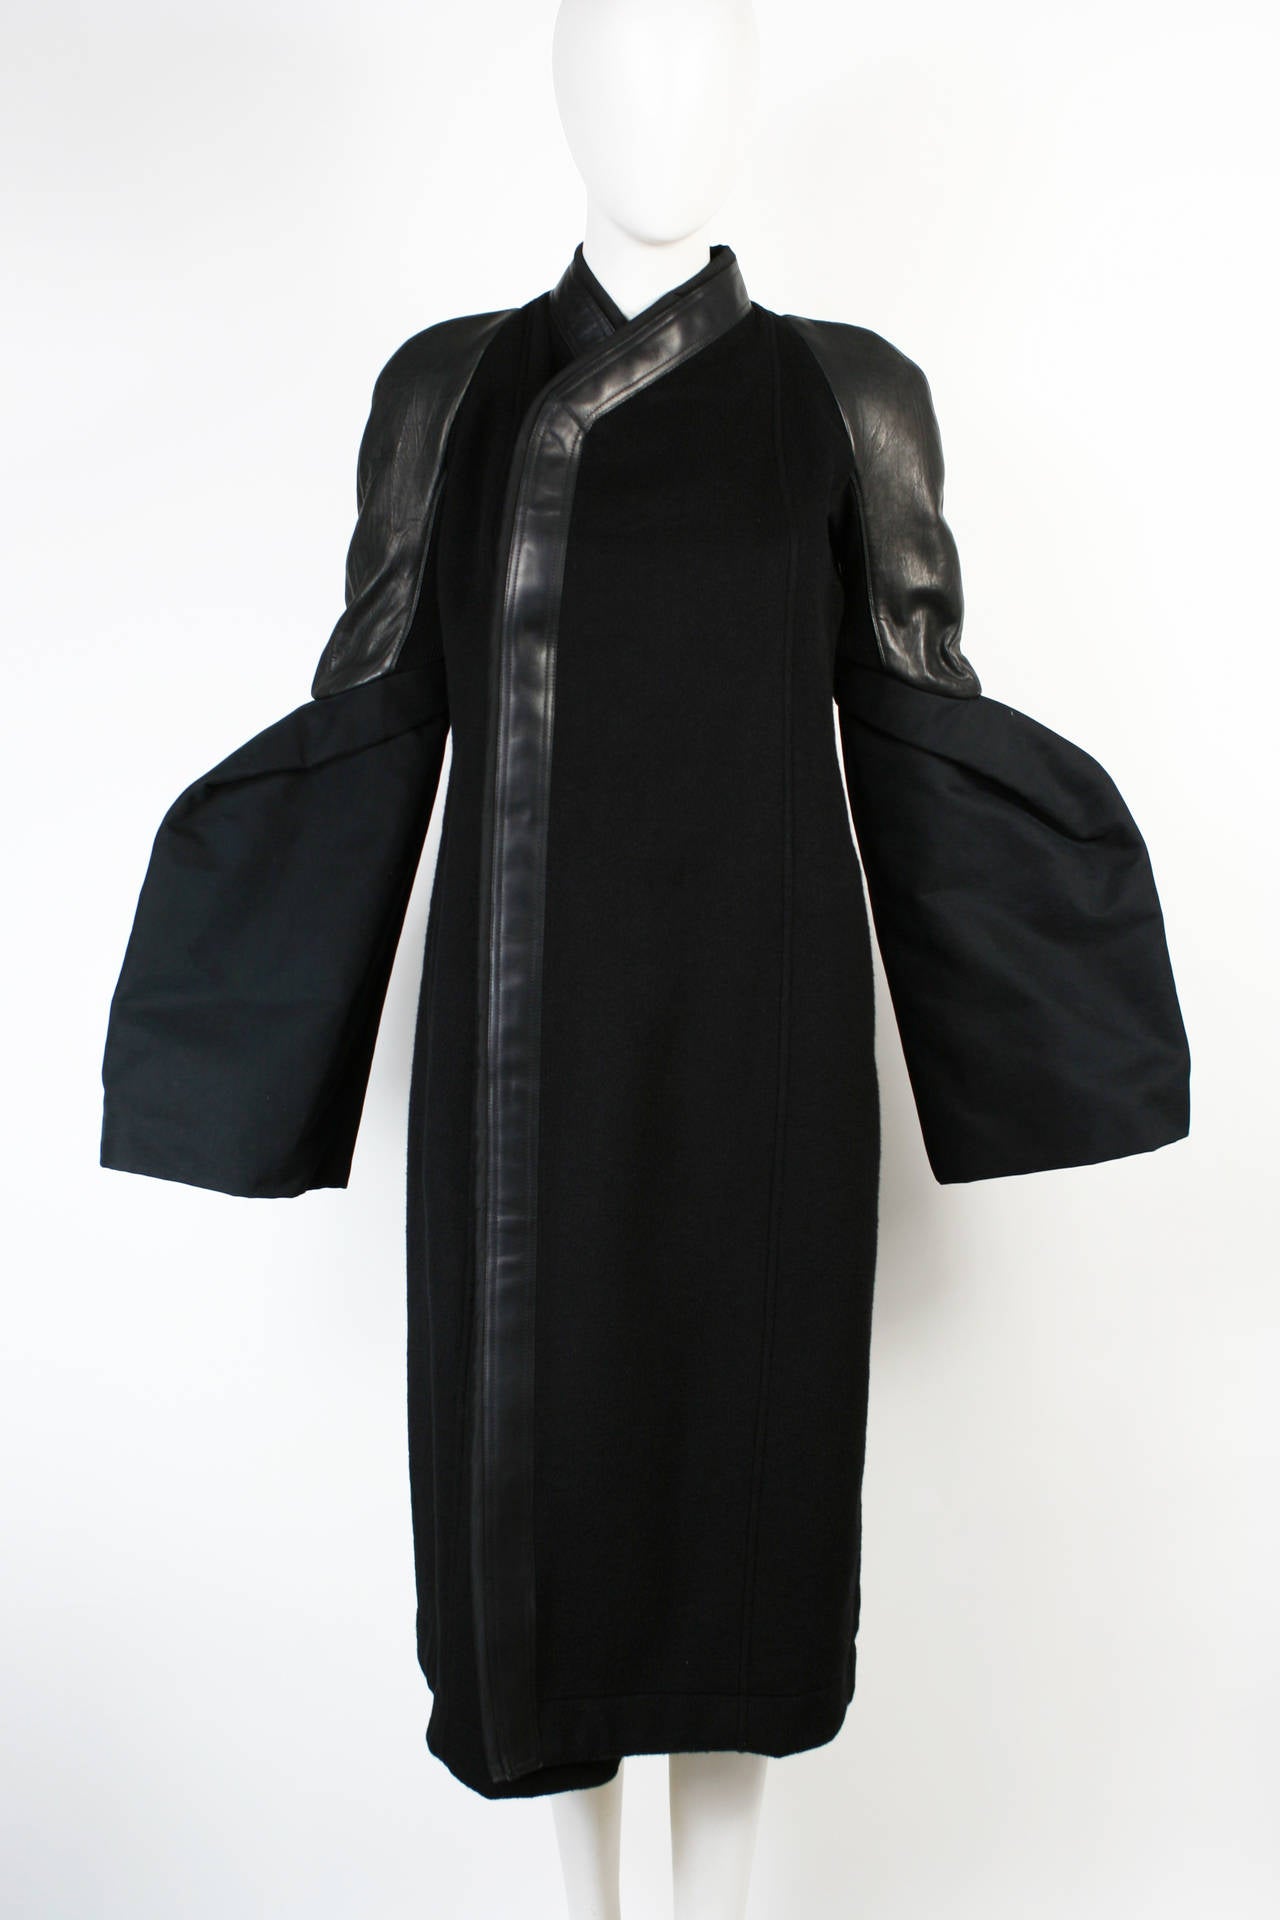 Rick Owens Sculptural Black Cashmere Coat with Leather Detail. 
From the Plinth FW 2013 Collection. Fabulous sculpted sleeves made from cotton. Leather shoulders and trim. Highest quality cashmere. New With Tags.
Marked size 8 but would fit sizes